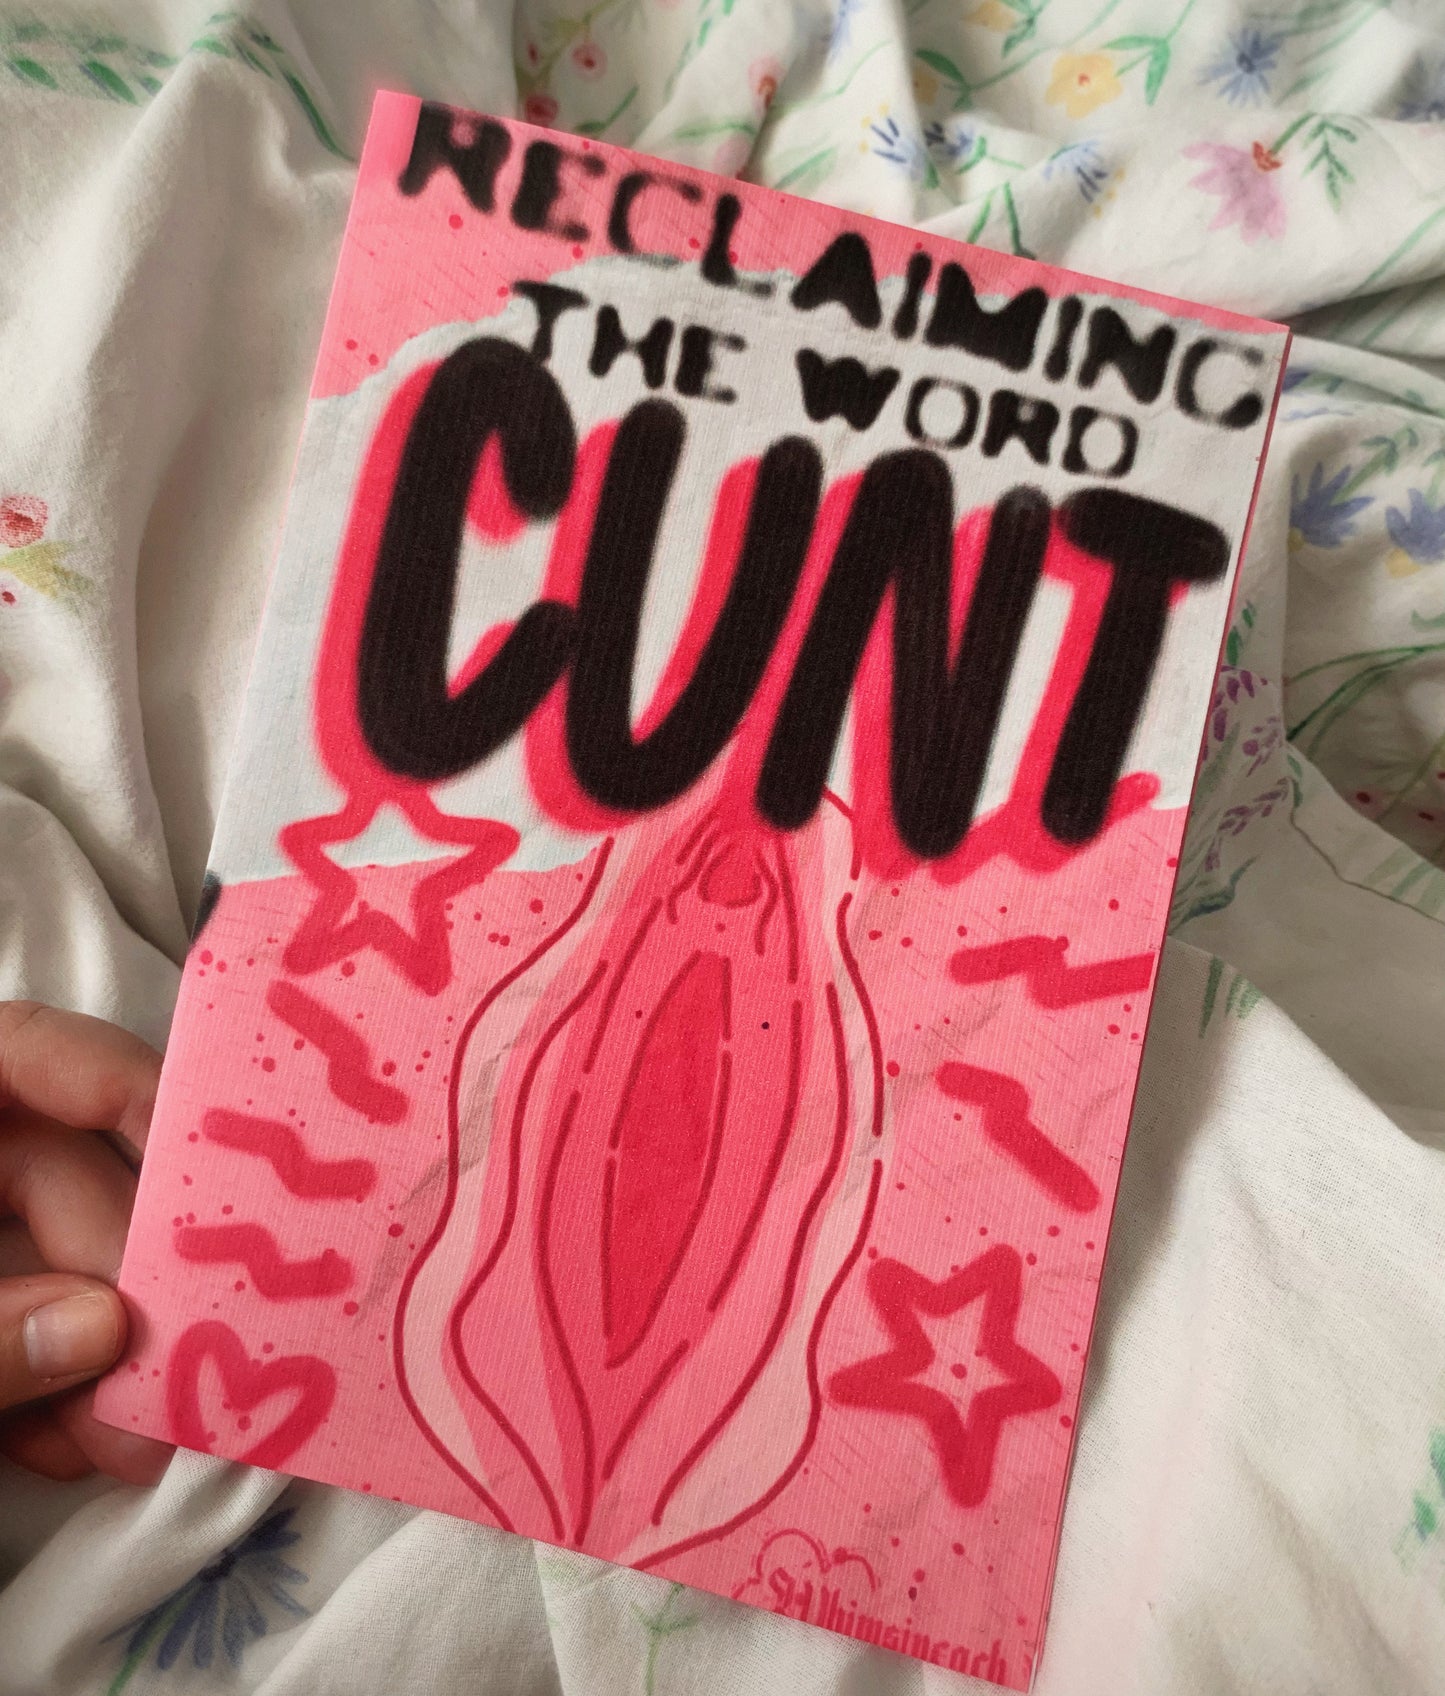 “Reclaiming the word cunt” A zine